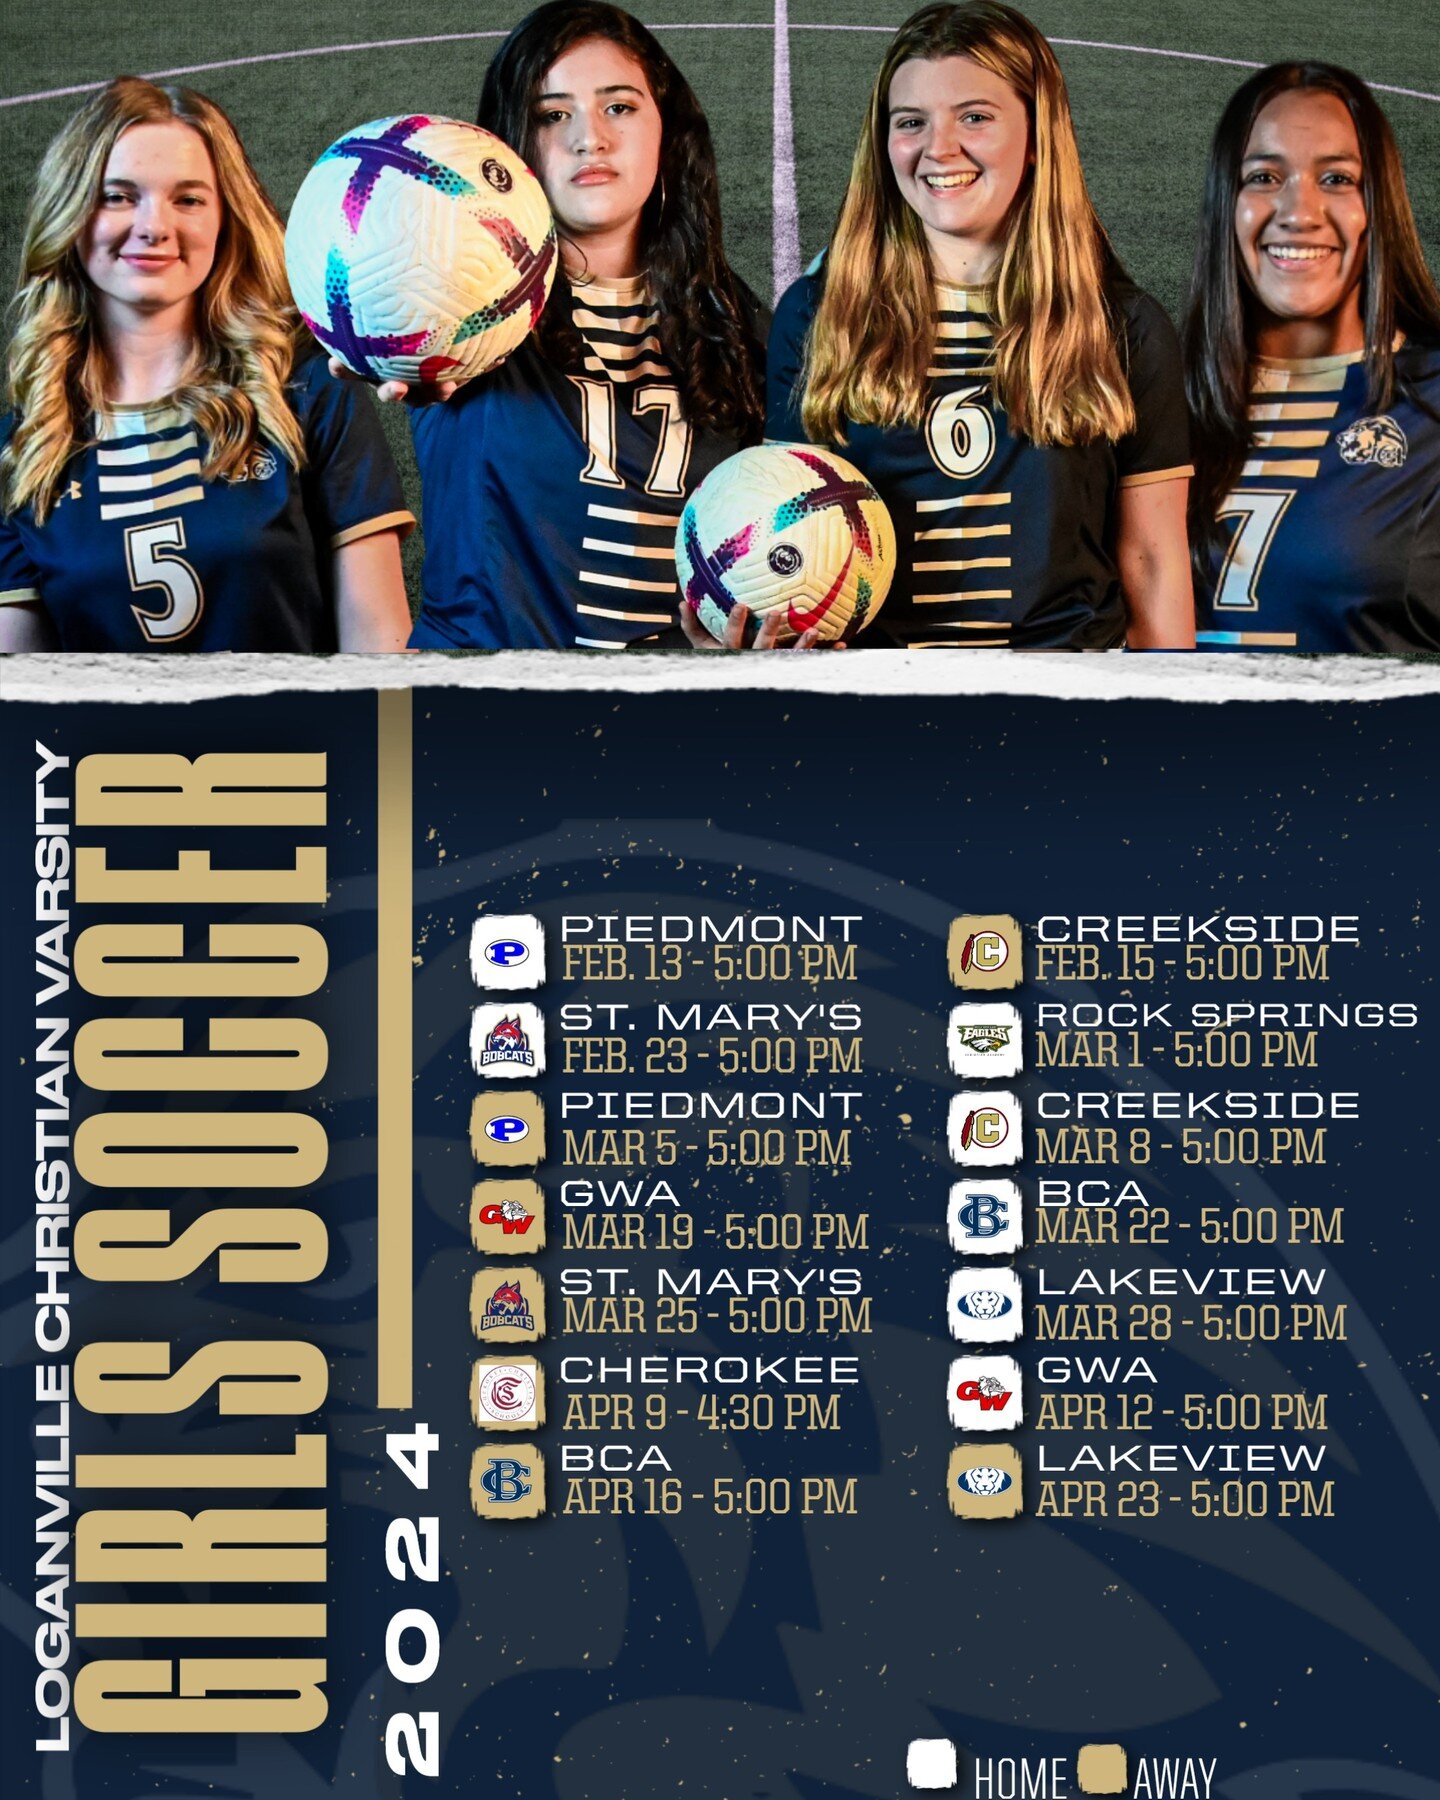 Varsity Girls Soccer starts next week against Piedmont at home! Check out the full season above to cheer on the Lady Lions. ⚽️